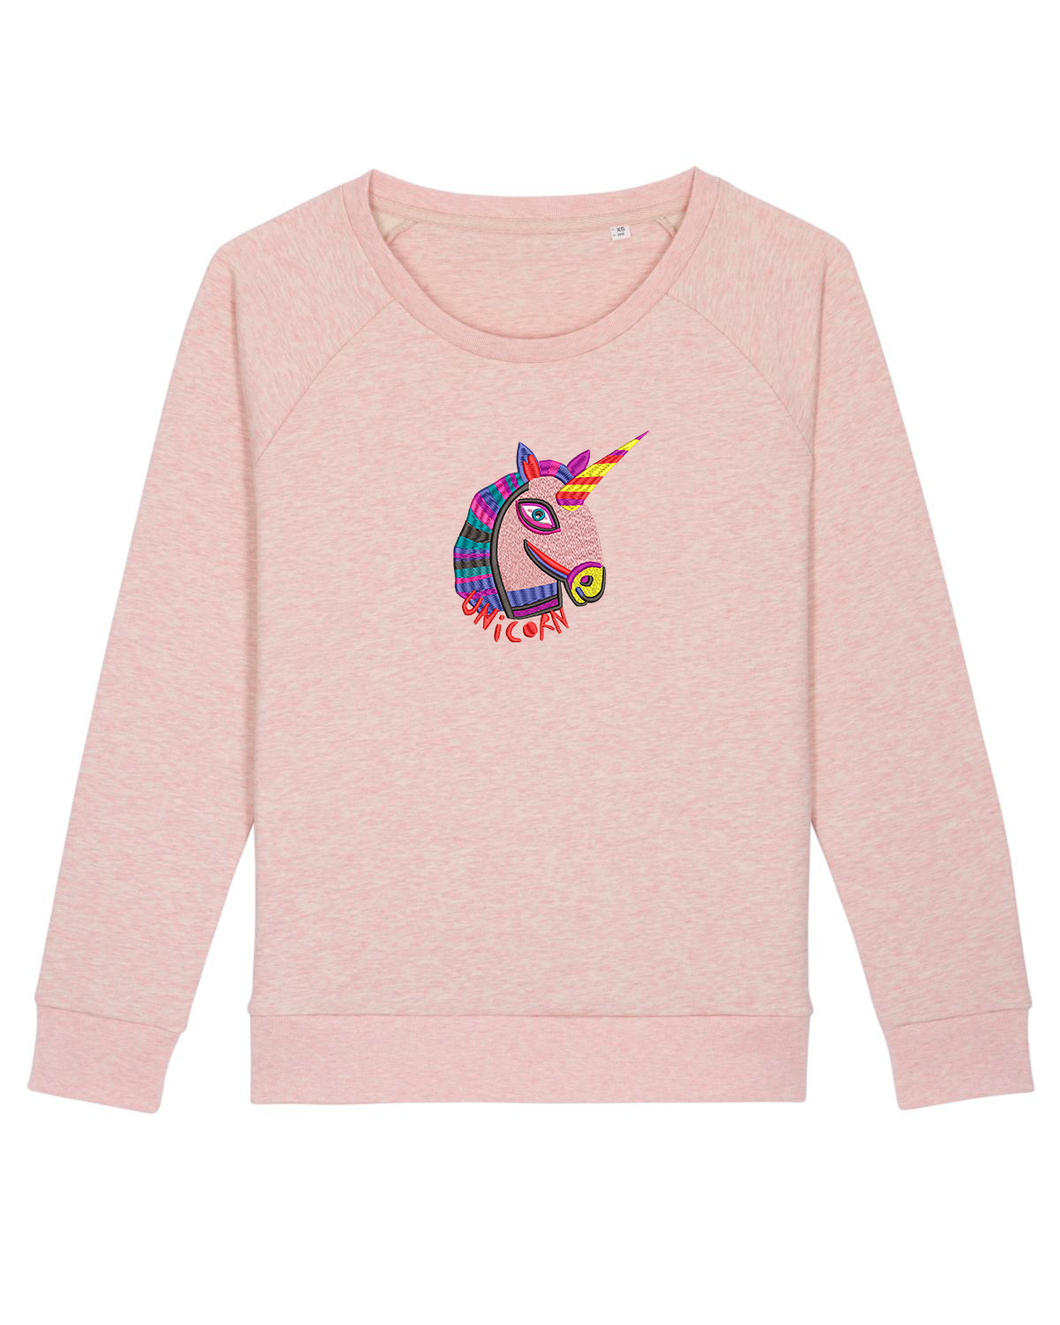 Unicorn 🦄- Embroidered WOMEN'S RELAXED FIT SWEATSHIRT